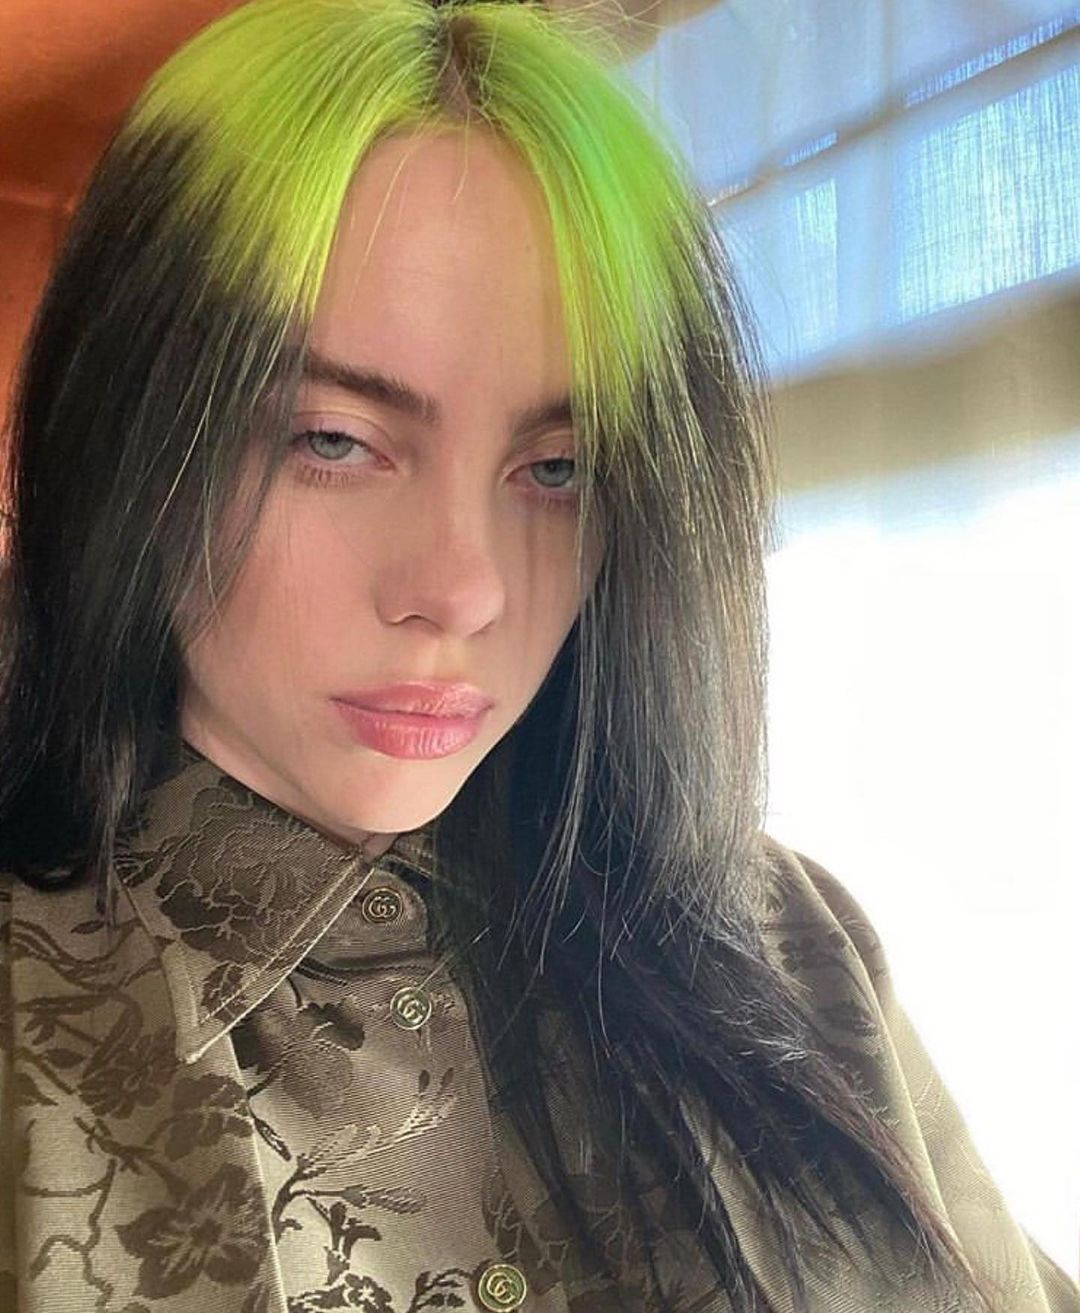 Photos n°21 : Billie Eilish Bares Some Breasts at for Thanksgiving!